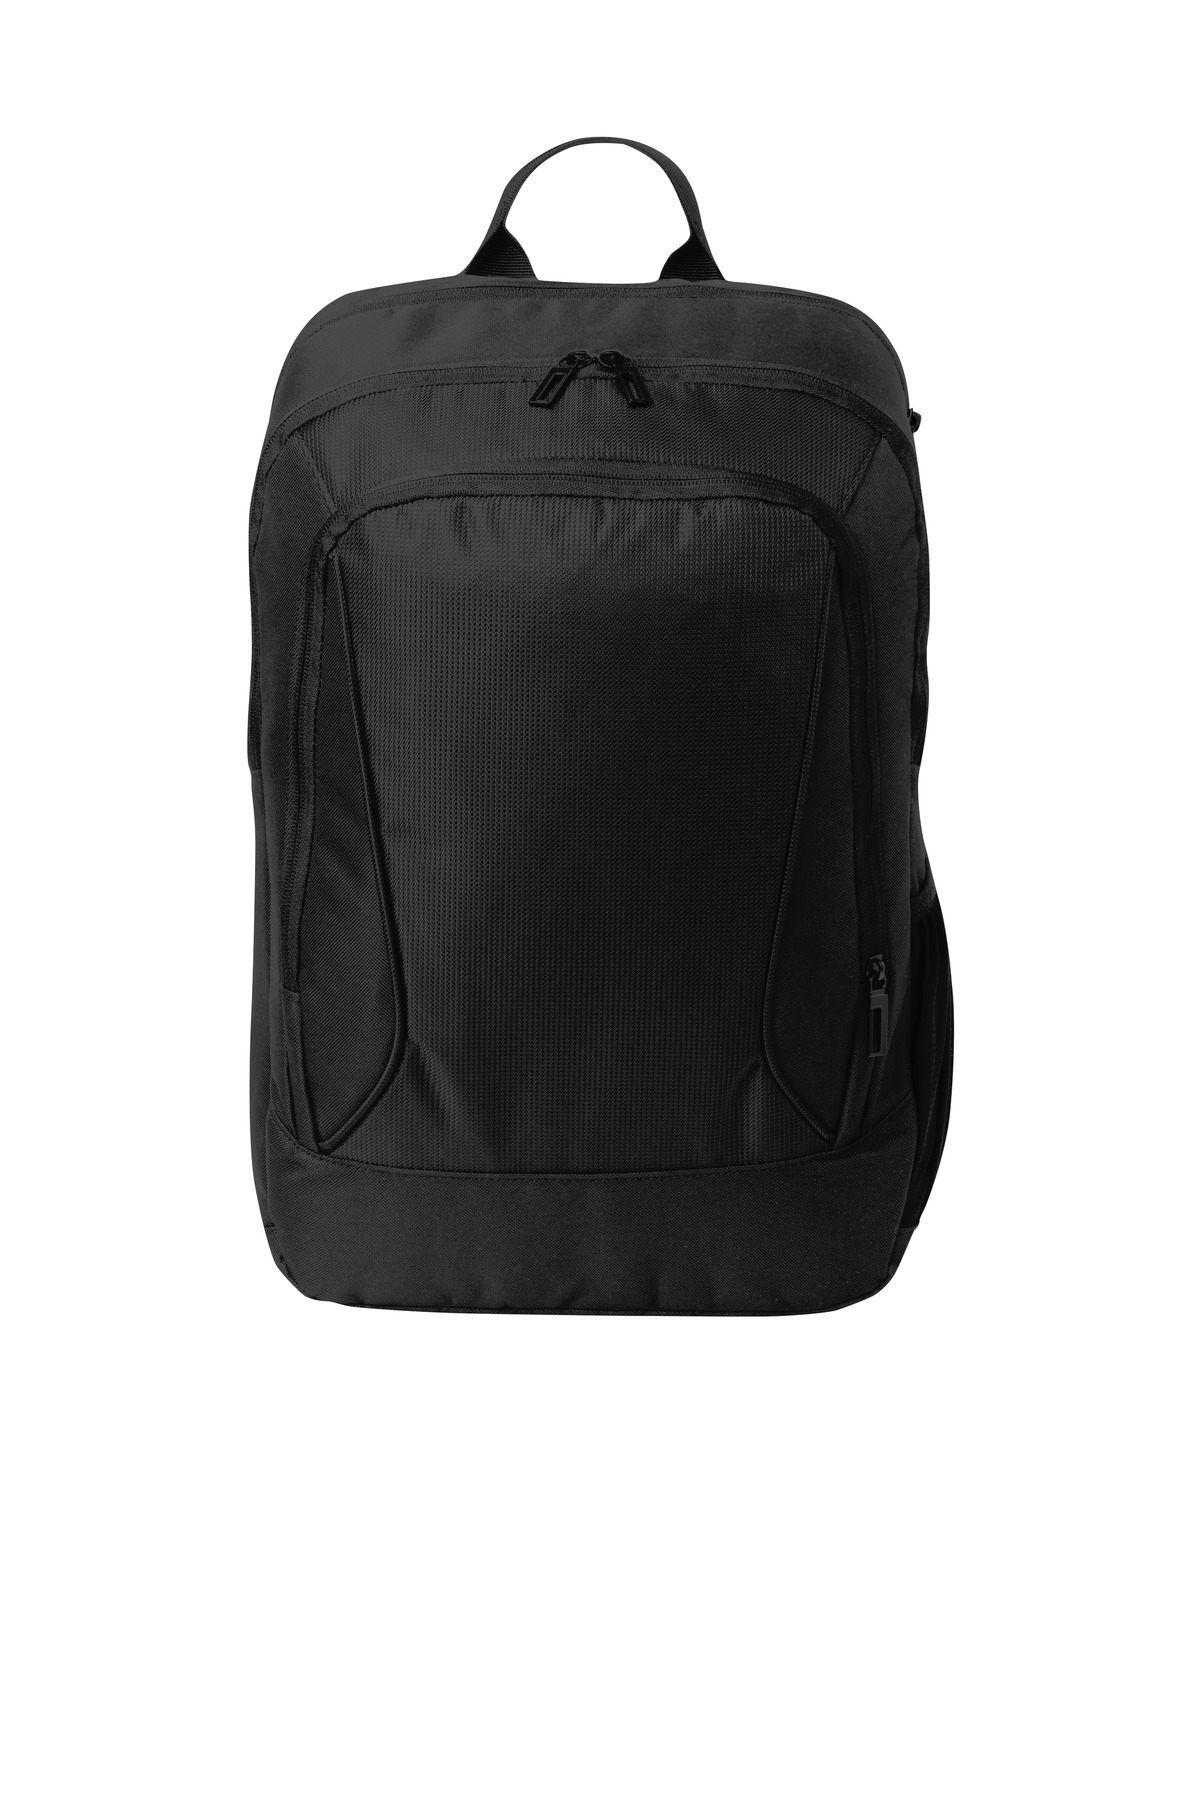 Port Authority City Backpack-